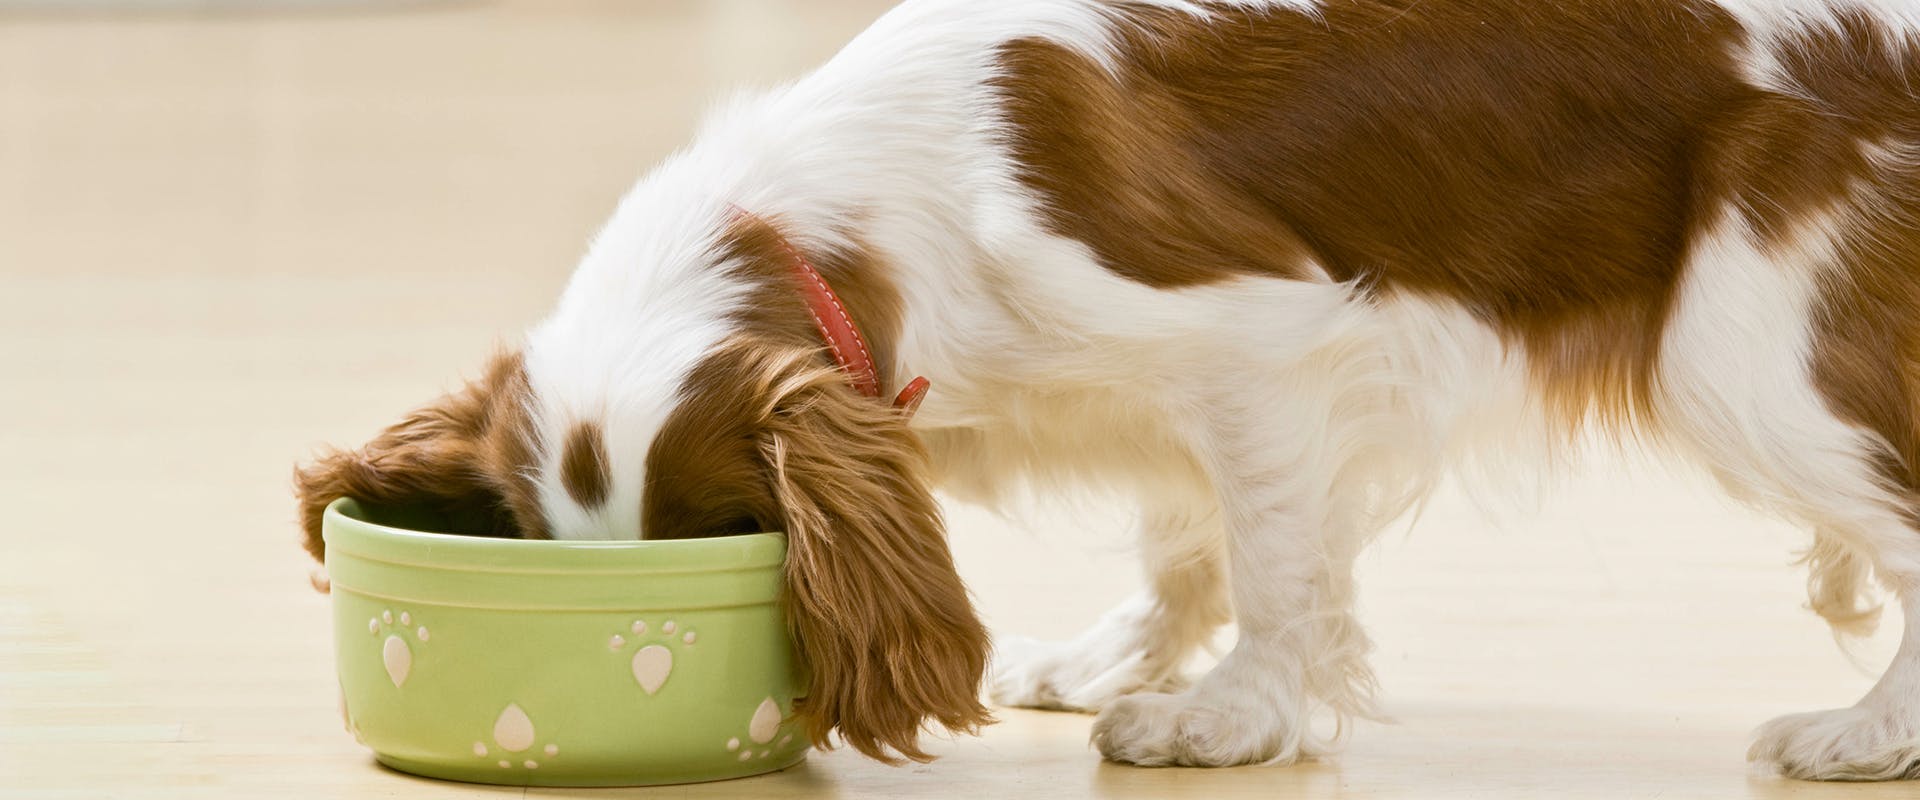 A puppy eating, with its face buried in its dog bowl